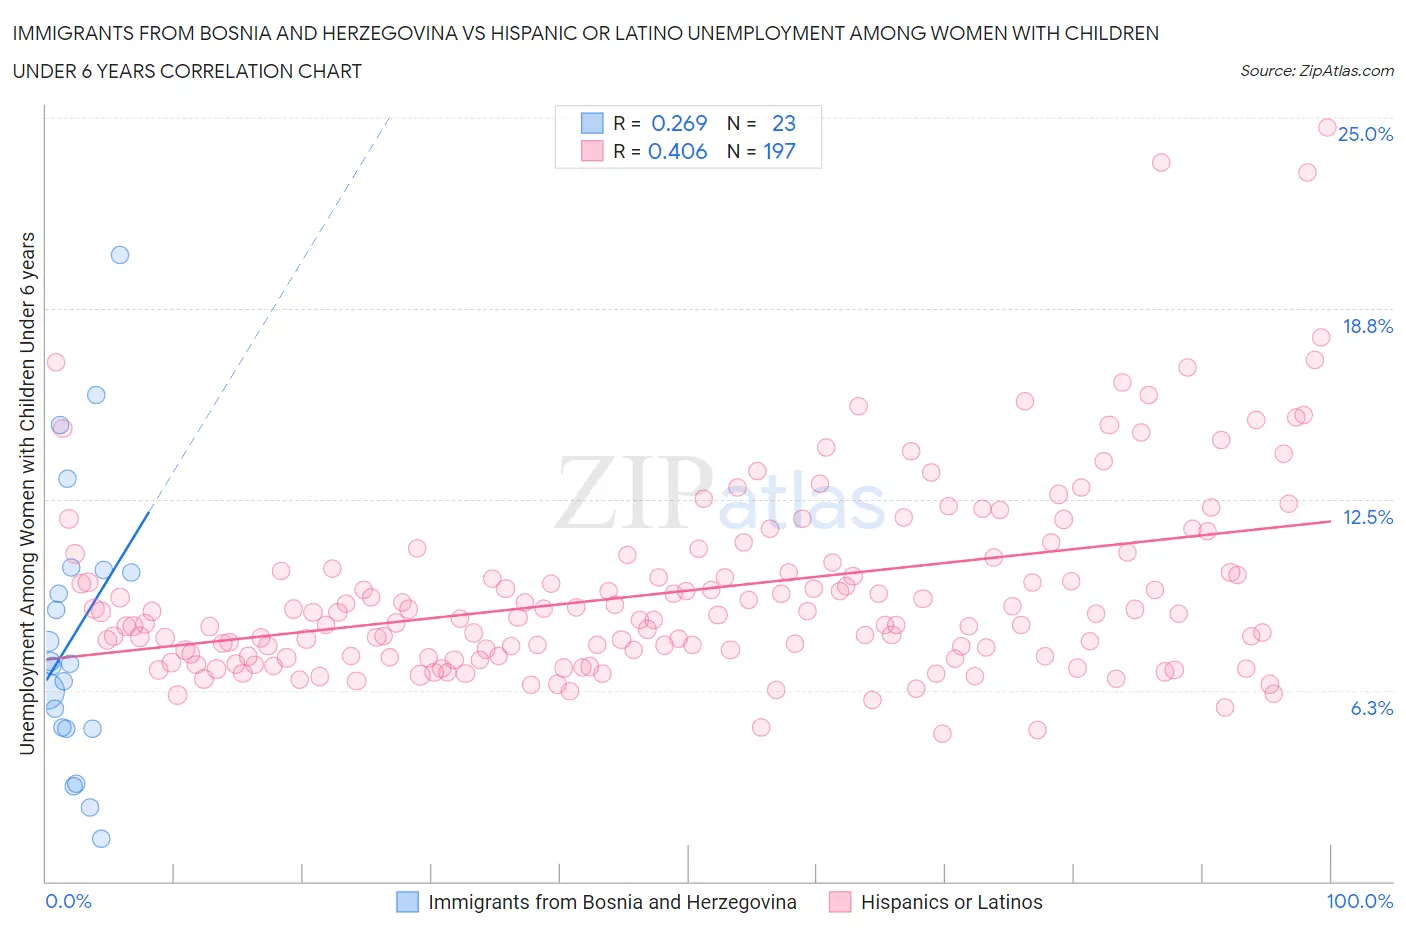 Immigrants from Bosnia and Herzegovina vs Hispanic or Latino Unemployment Among Women with Children Under 6 years